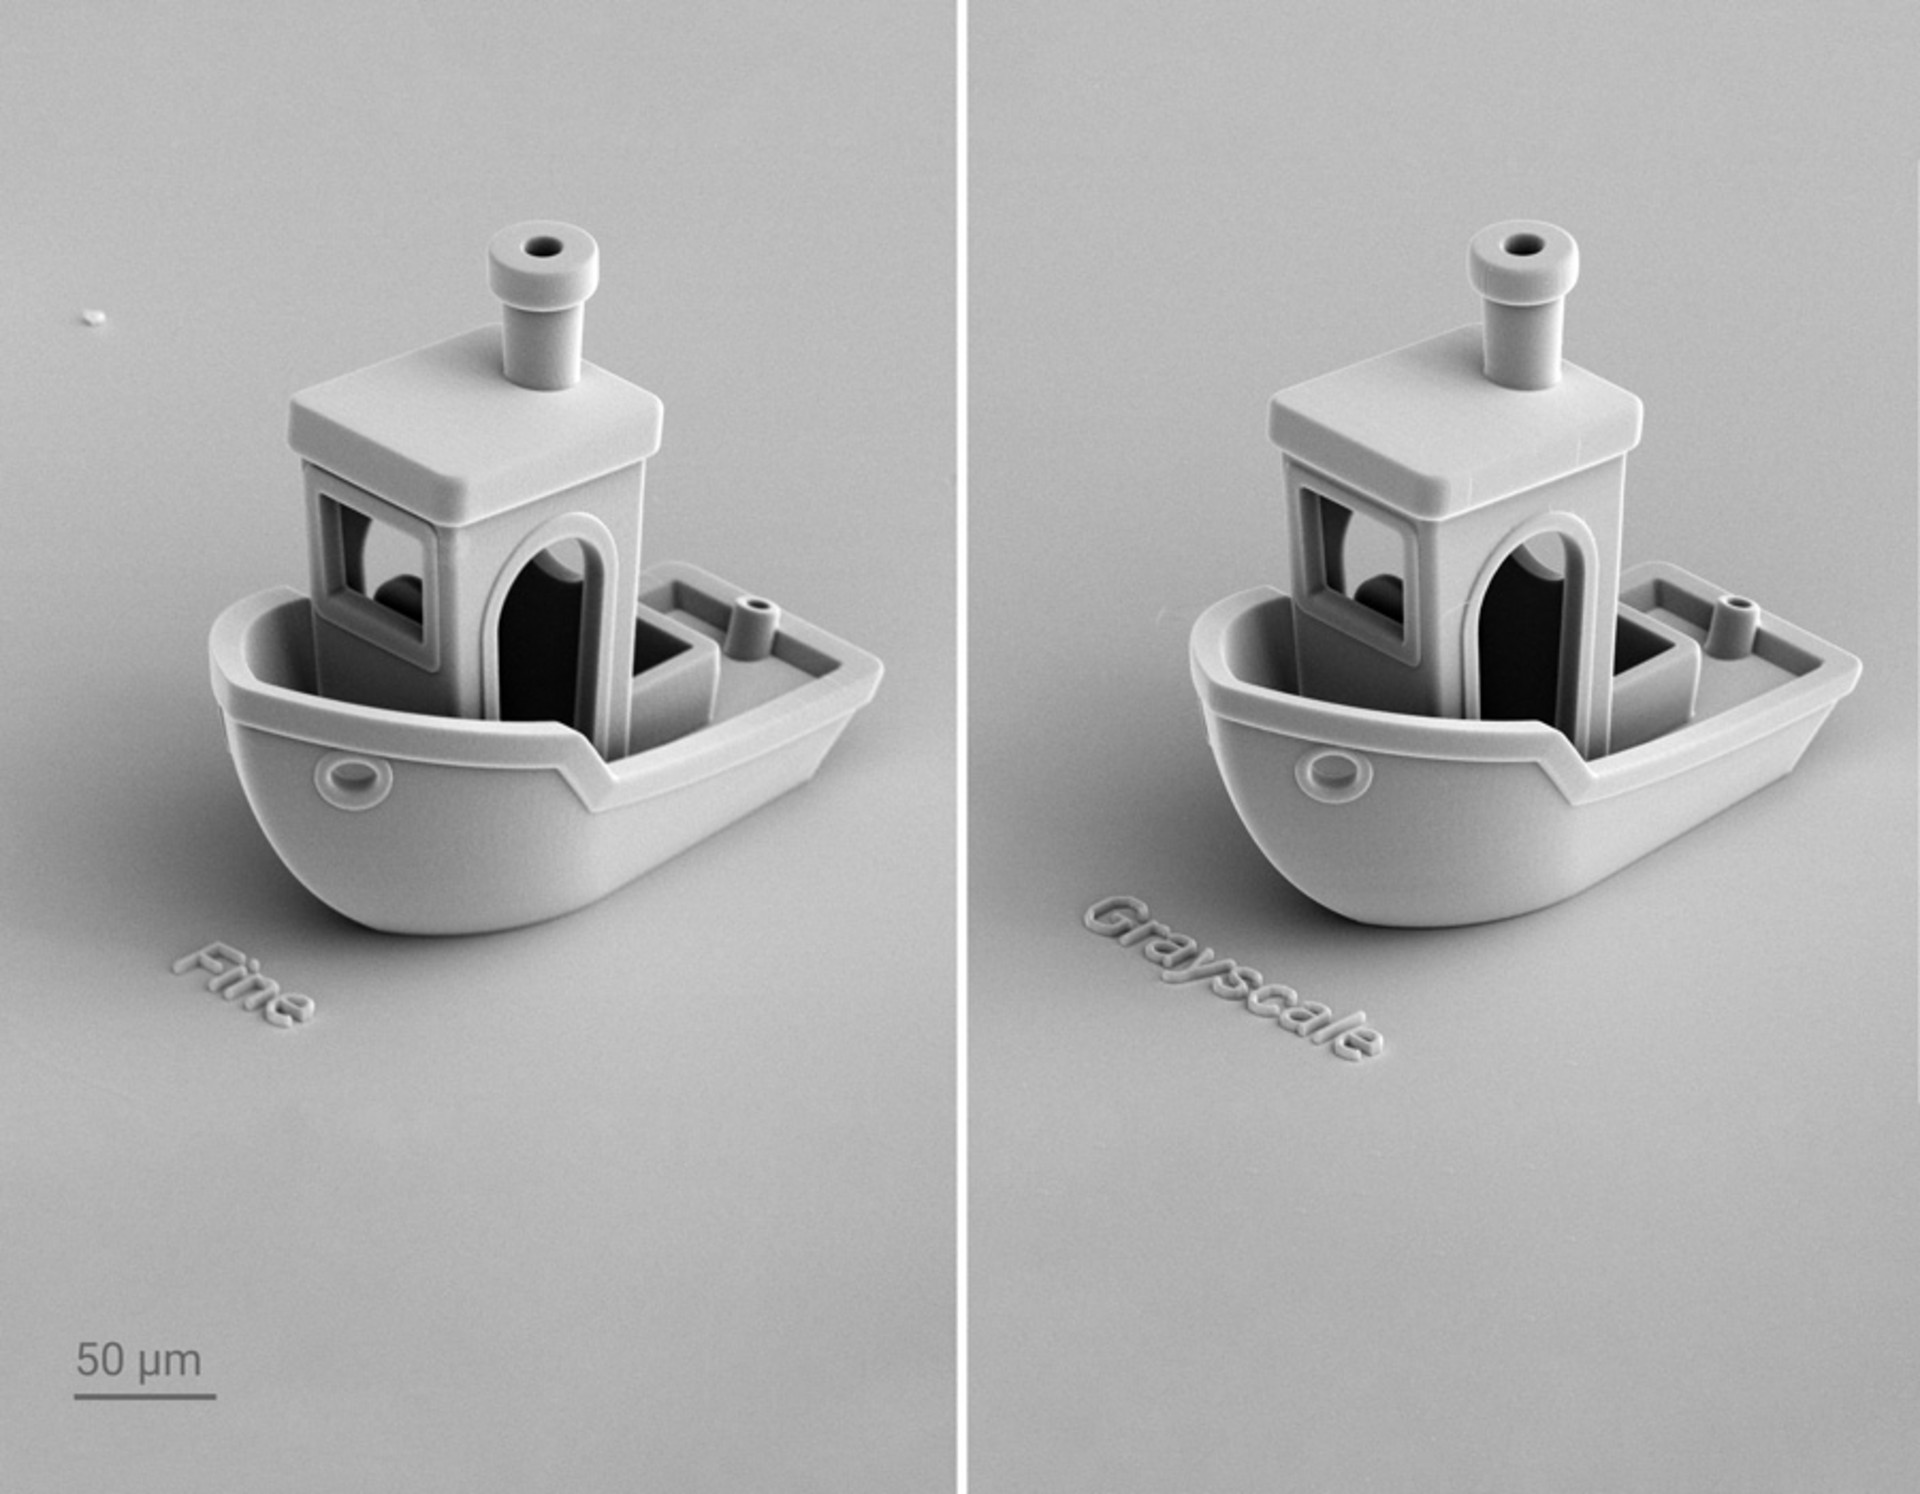 Speed comparison of a Benchy boat 3D printed by 2GL (left) and a very competitive 2PP system (right)